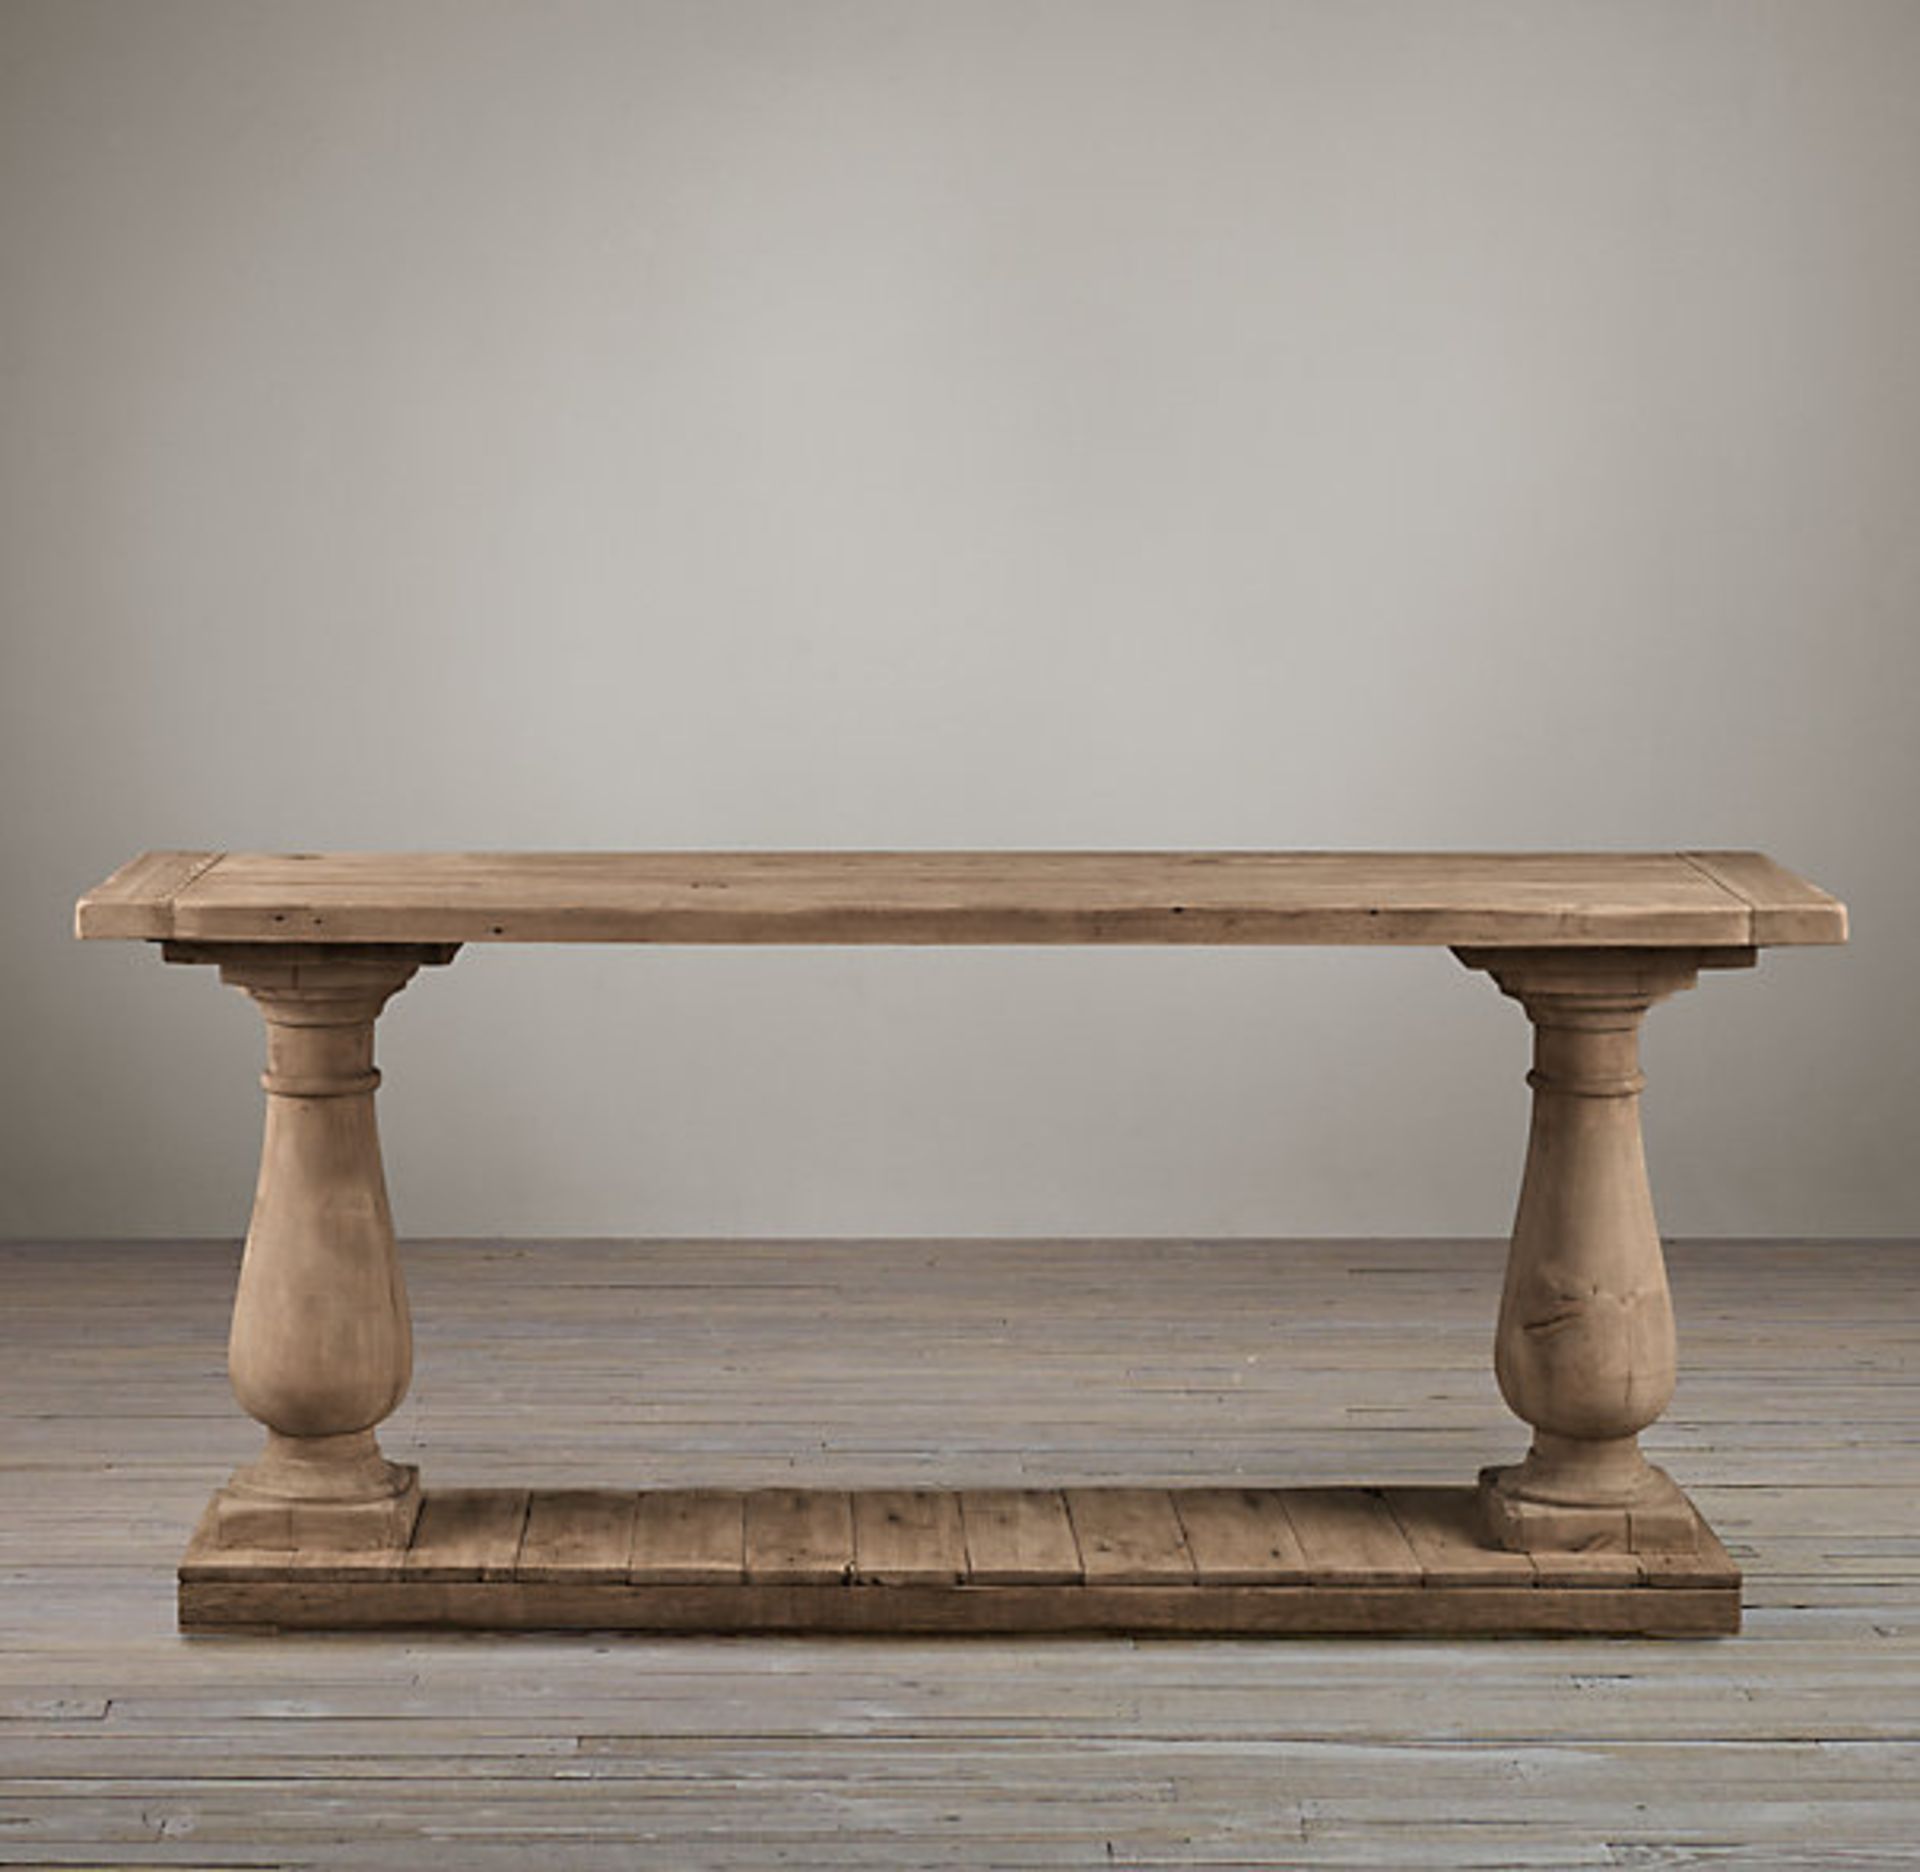 Balustrade Salvage Dining Table Base Only - The Salvage Collection Tells An Inspiring Tale Of